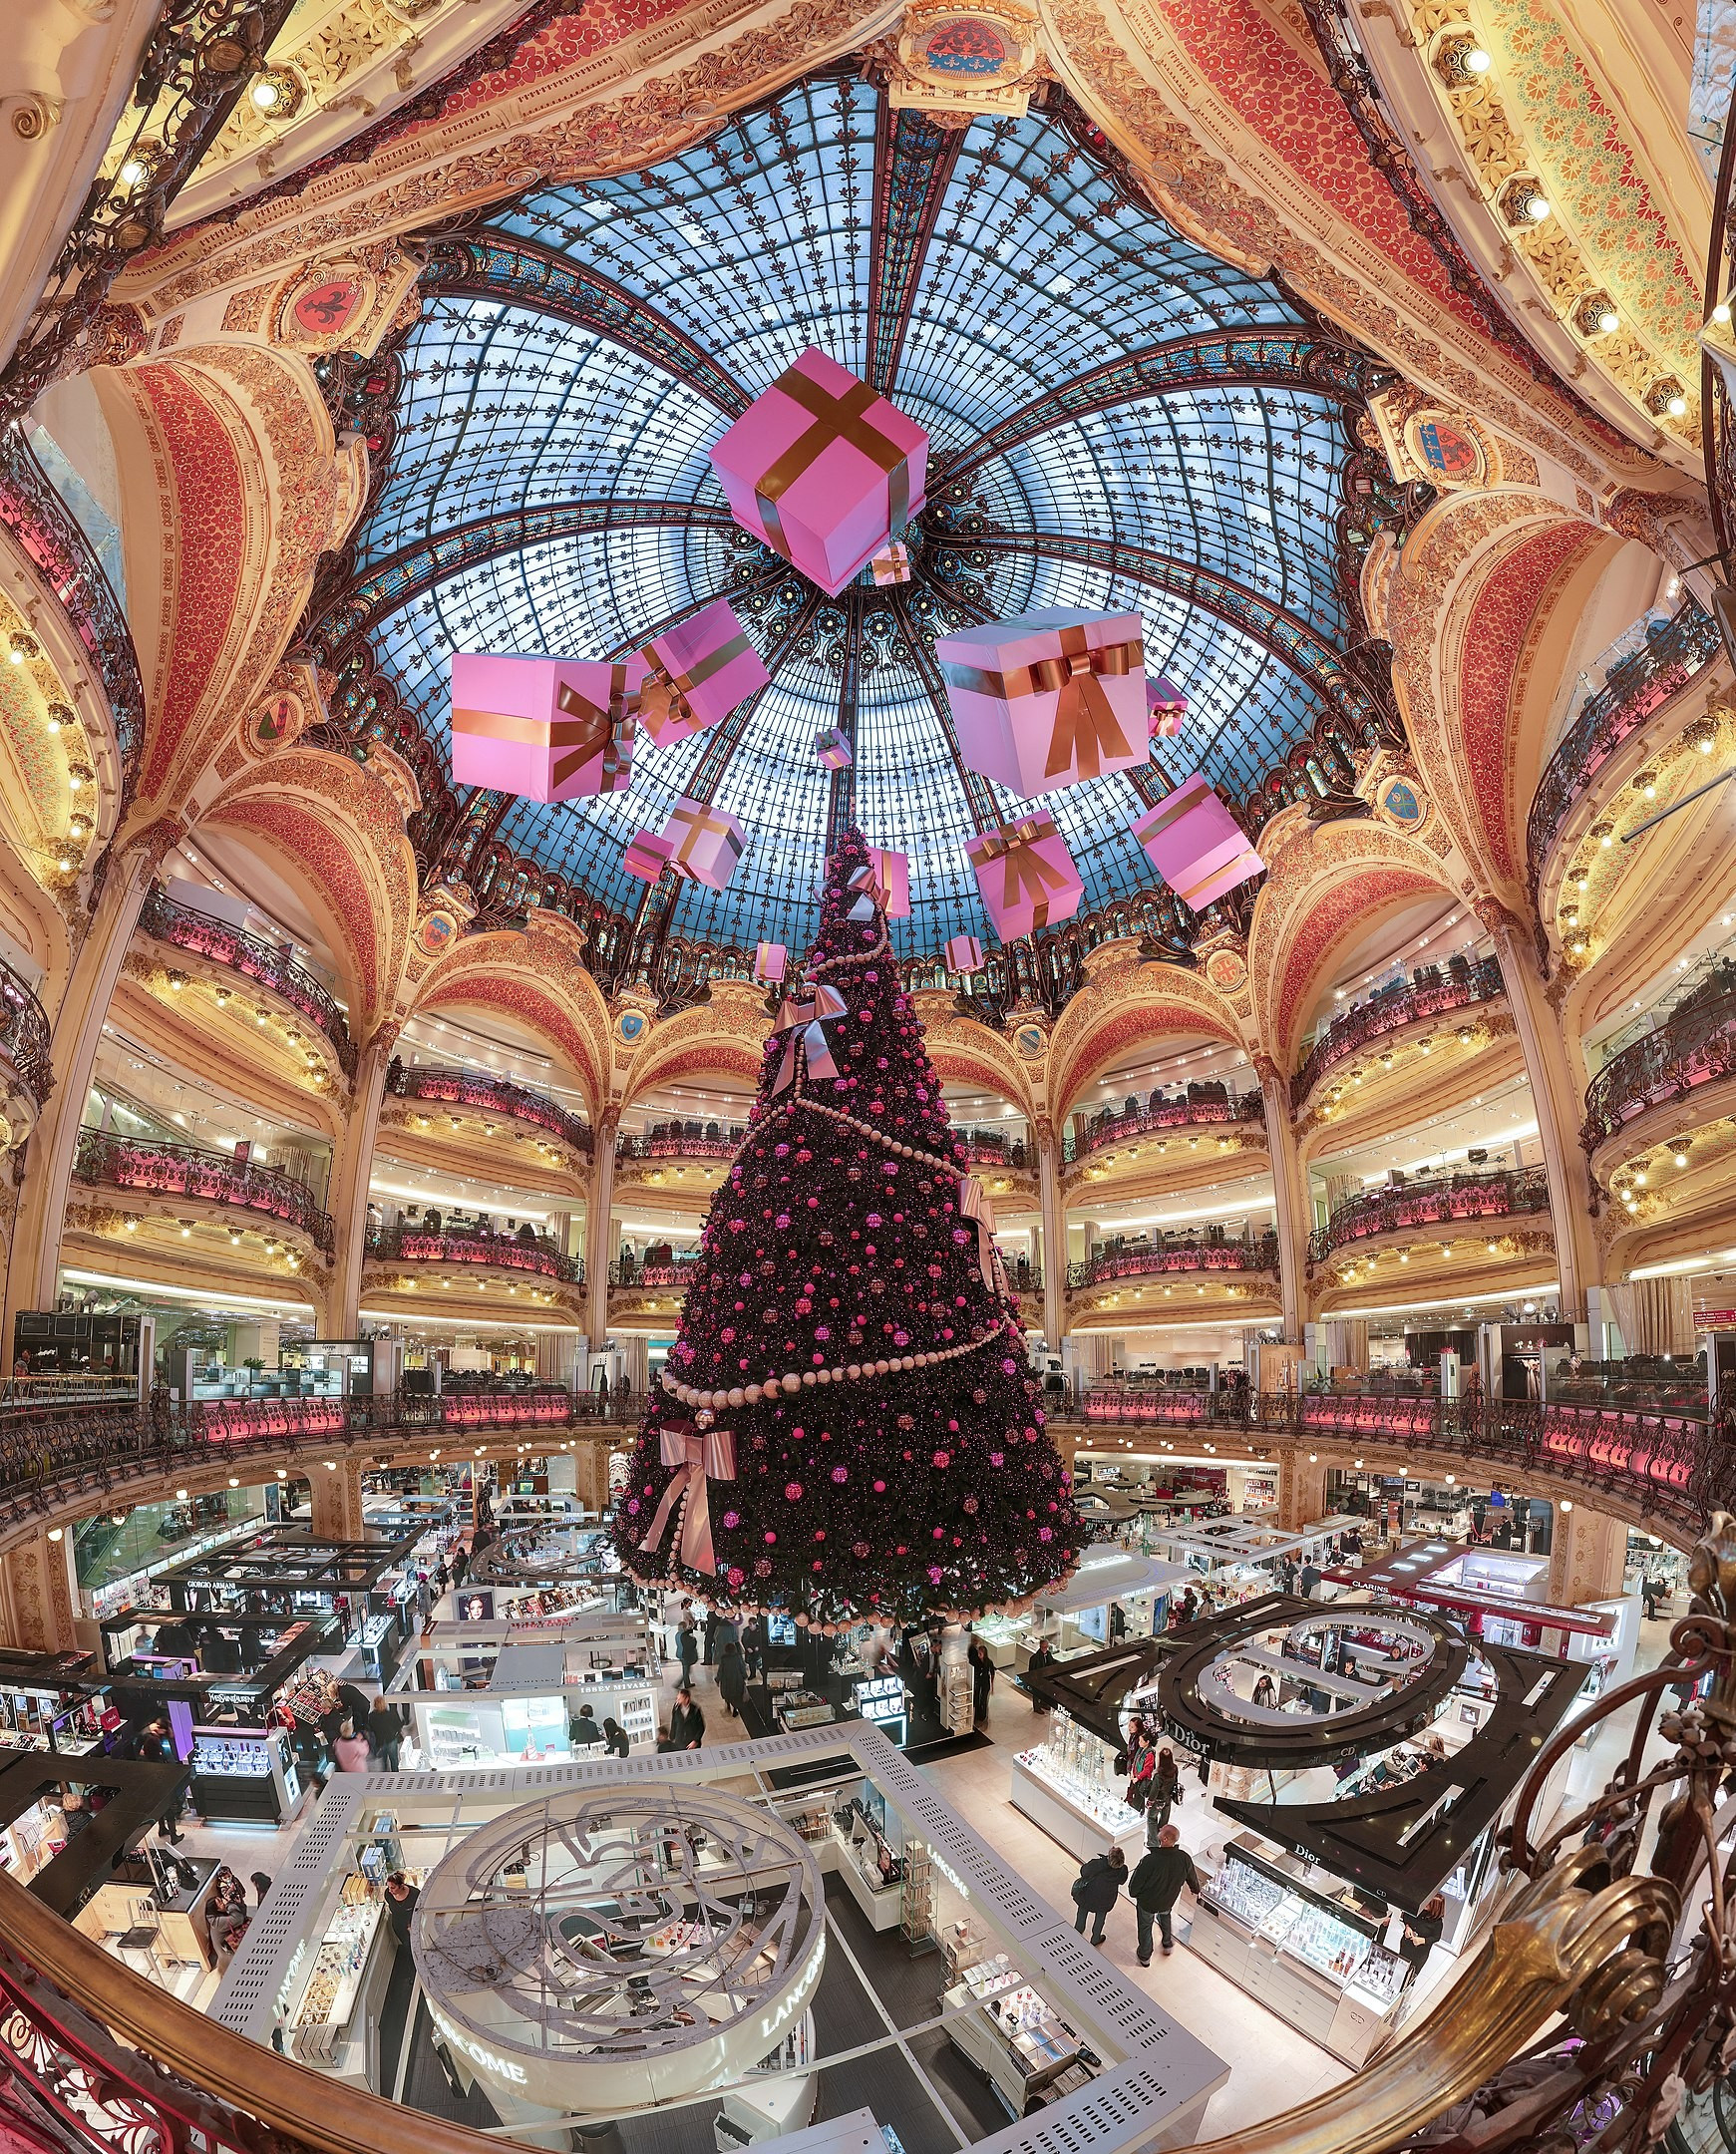 Par Benh LIEU SONG (Flickr) — Galeries Lafayette Dome 2009, CC BY-SA 3.0, https://commons.wikimedia.org/w/index.php?curid=8673288